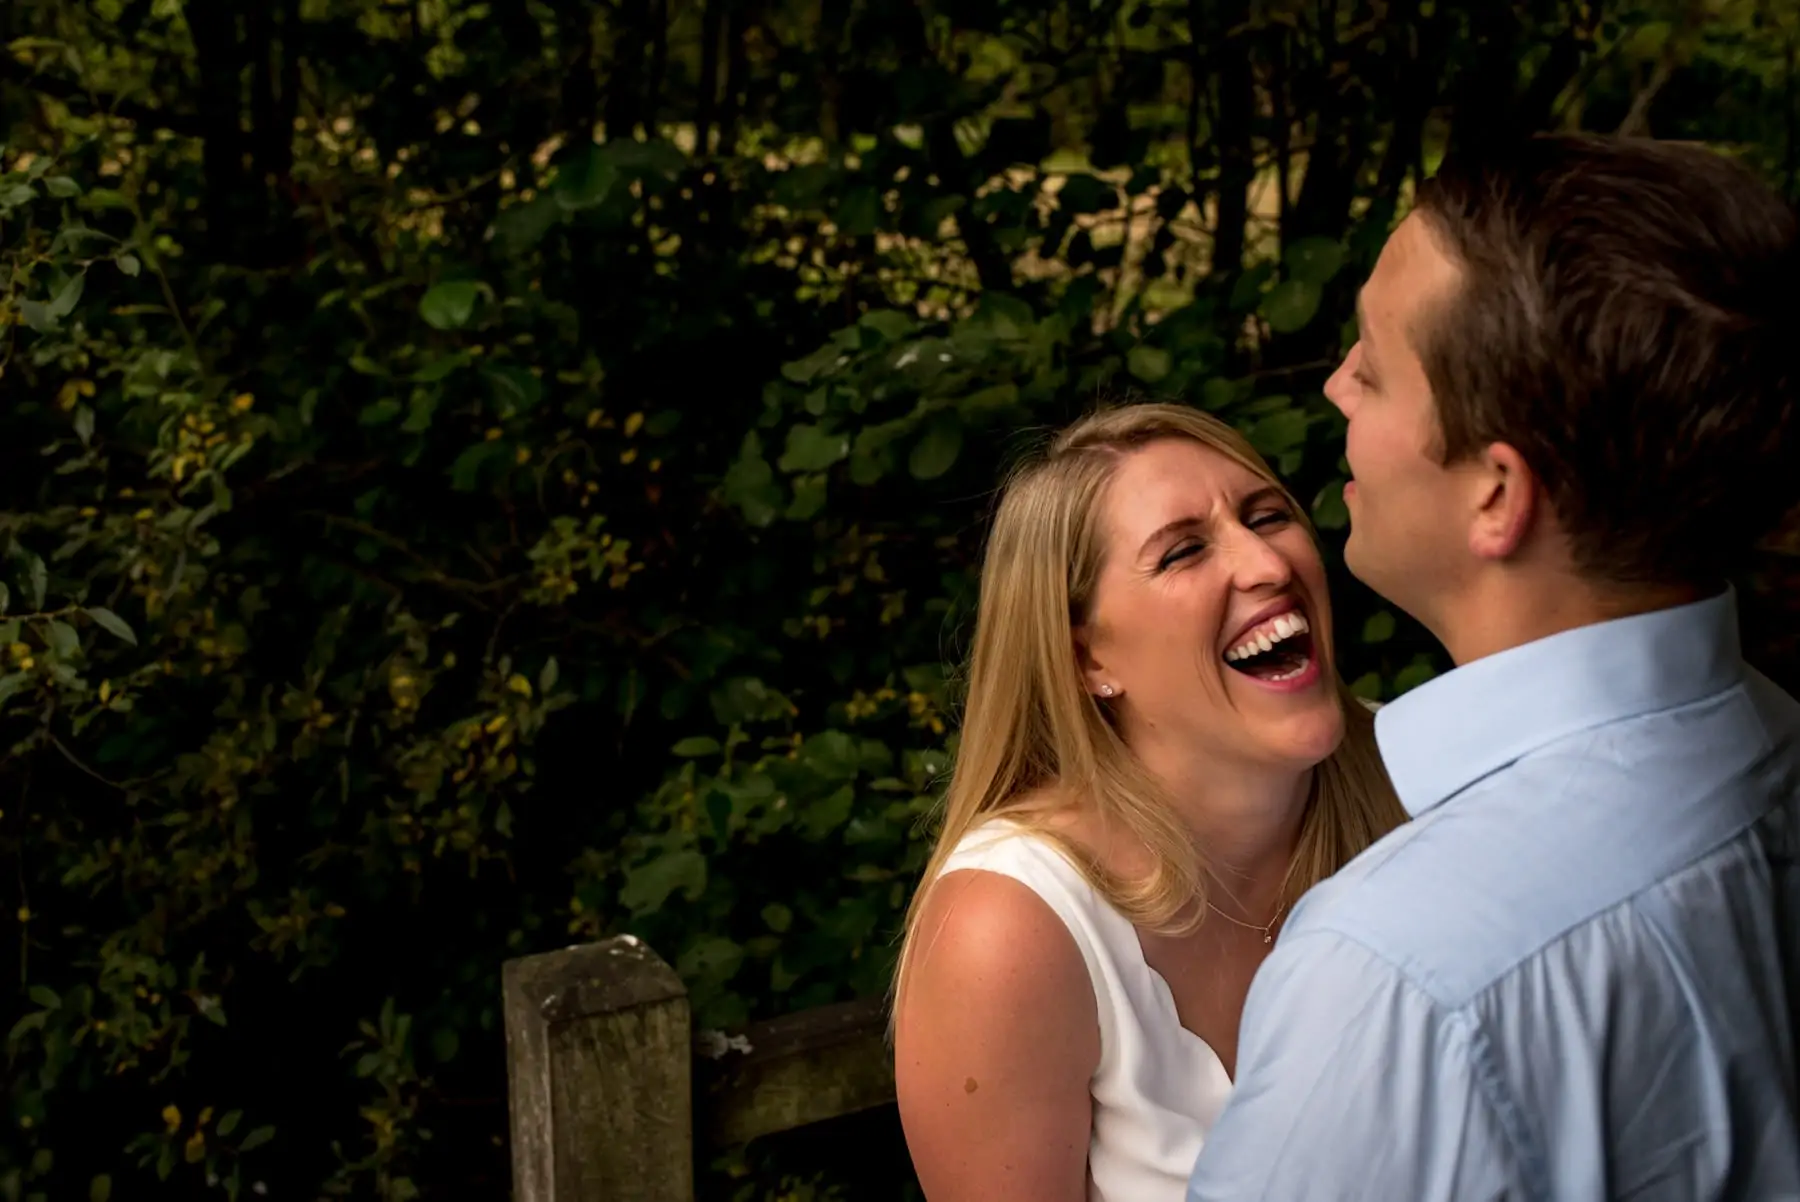 Photo of a women laughing really hard as her fiance hugs her in a park